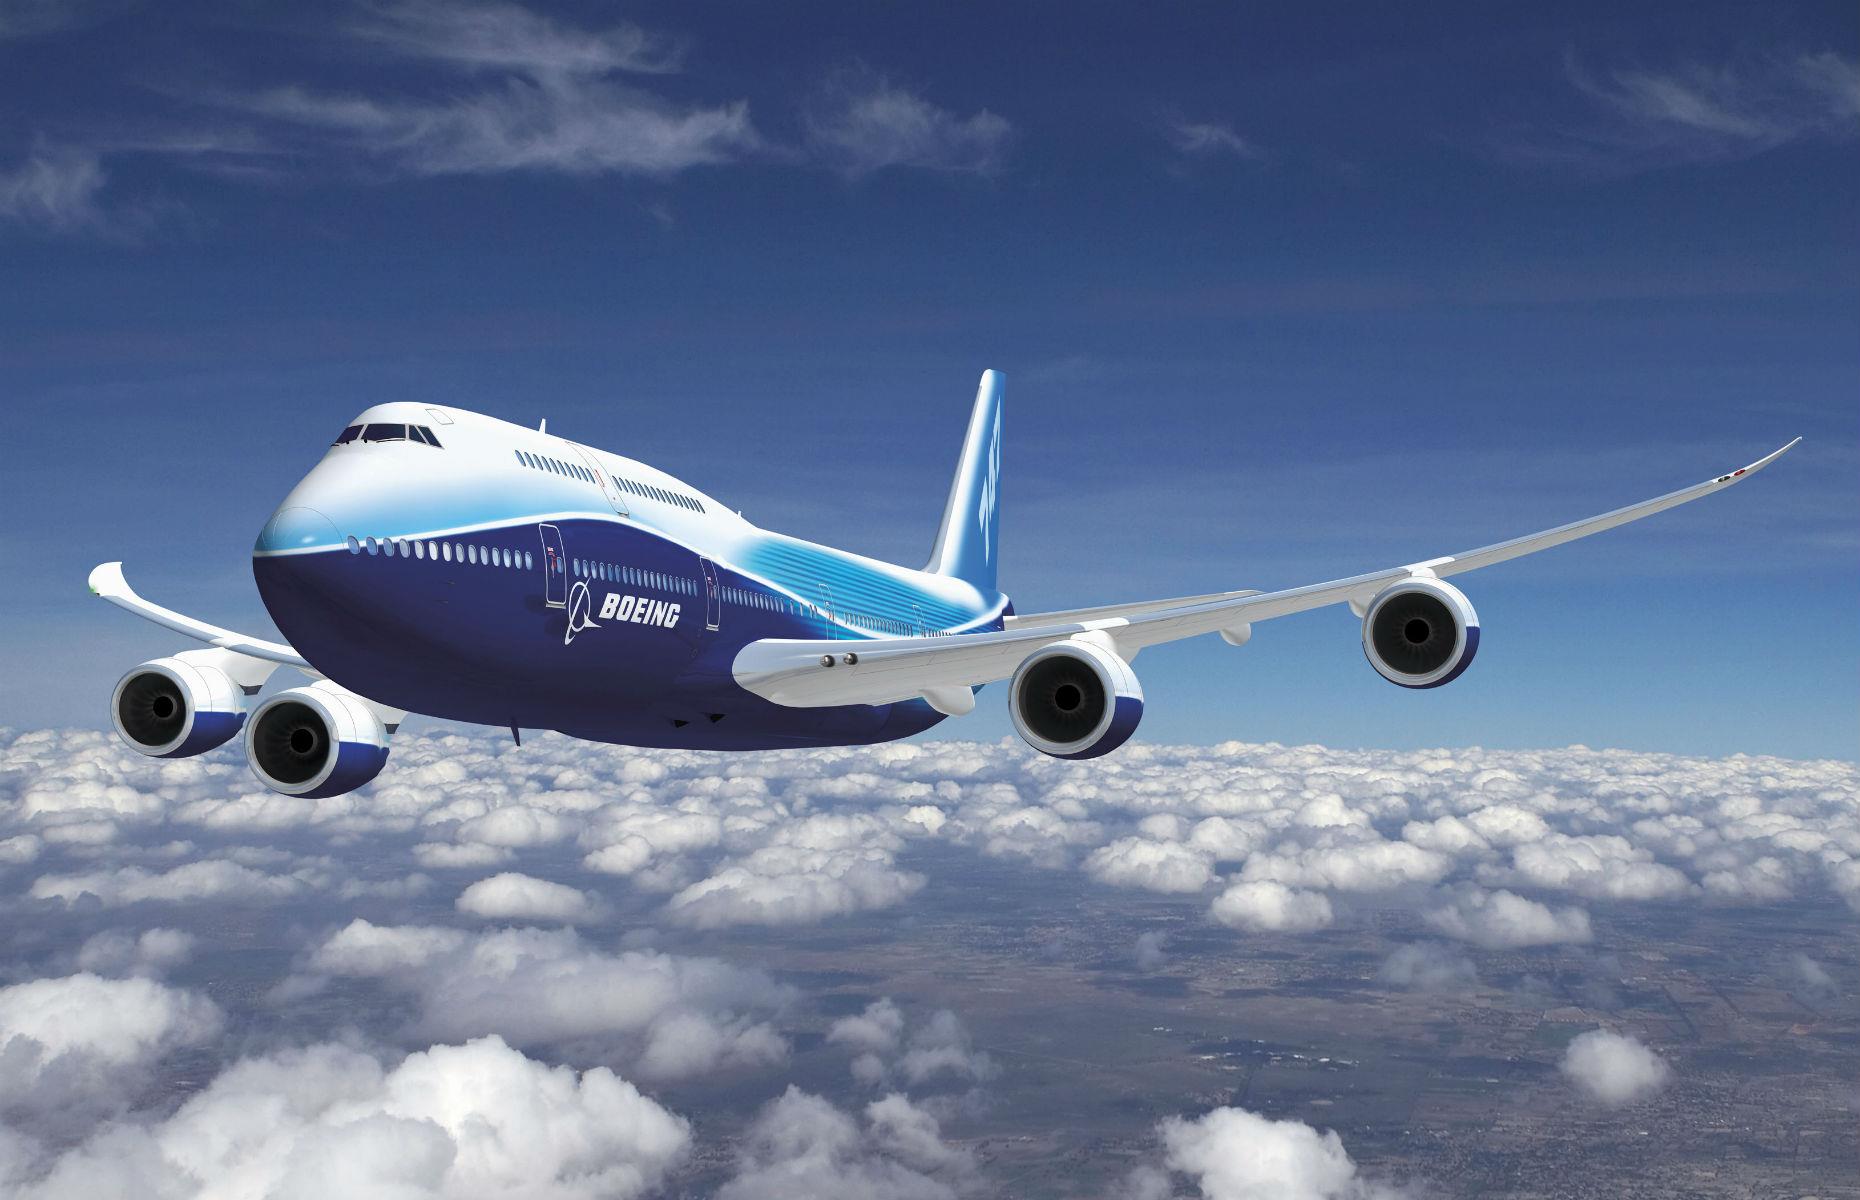 <p>The last Boeing 747-8 was delivered in 2023 – and that was a 747-8F, a freighter model that comfortably outperformed its passenger equivalent. The plane was not as commercially successful as its predecessors, but it successfully competed with the Airbus A380, ensuring that its competitors did not dominate the jumbo jet market.</p>  <p><strong><a href="https://www.facebook.com/loveexploringUK?utm_source=msn&utm_medium=social&utm_campaign=front">Love this? Follow us on Facebook for travel inspiration and more</a></strong></p>